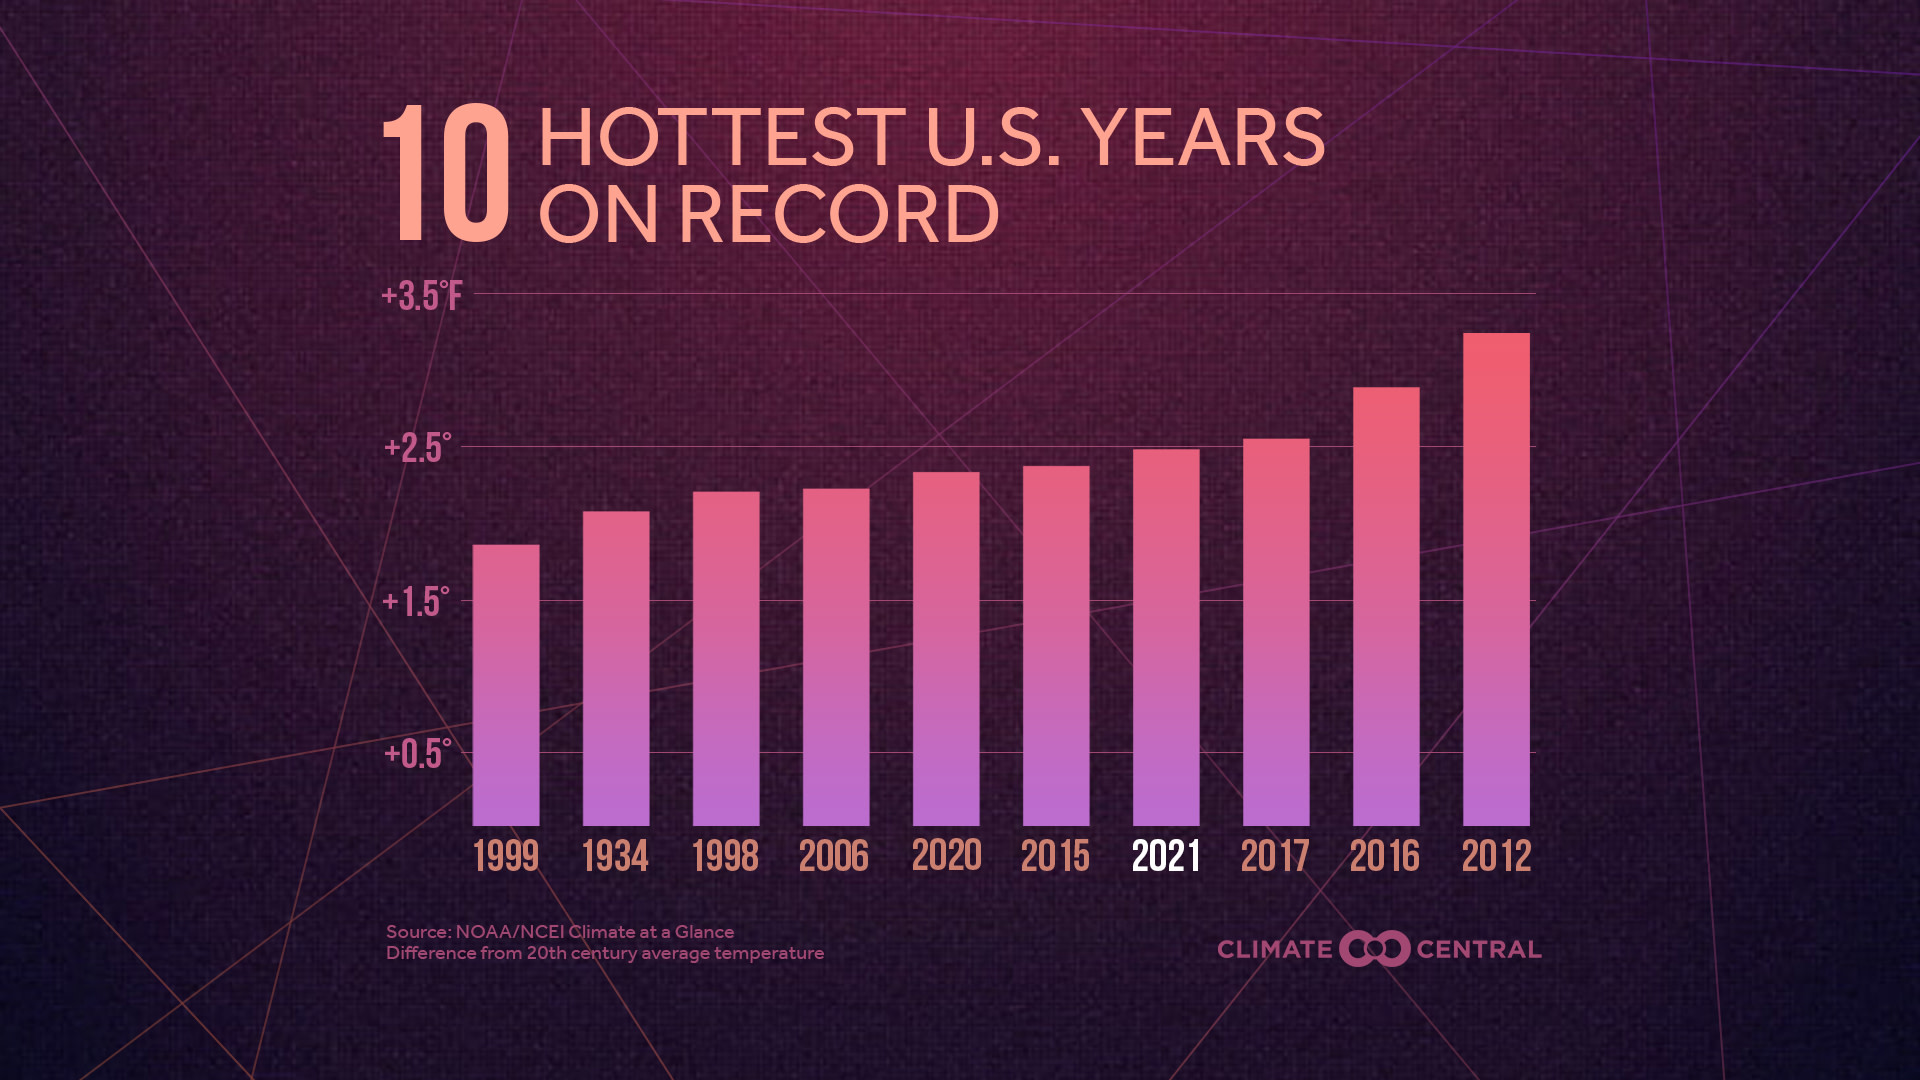 U.S. Hottest Years Rankings - U.S. Temperatures and Billion-Dollar Disasters